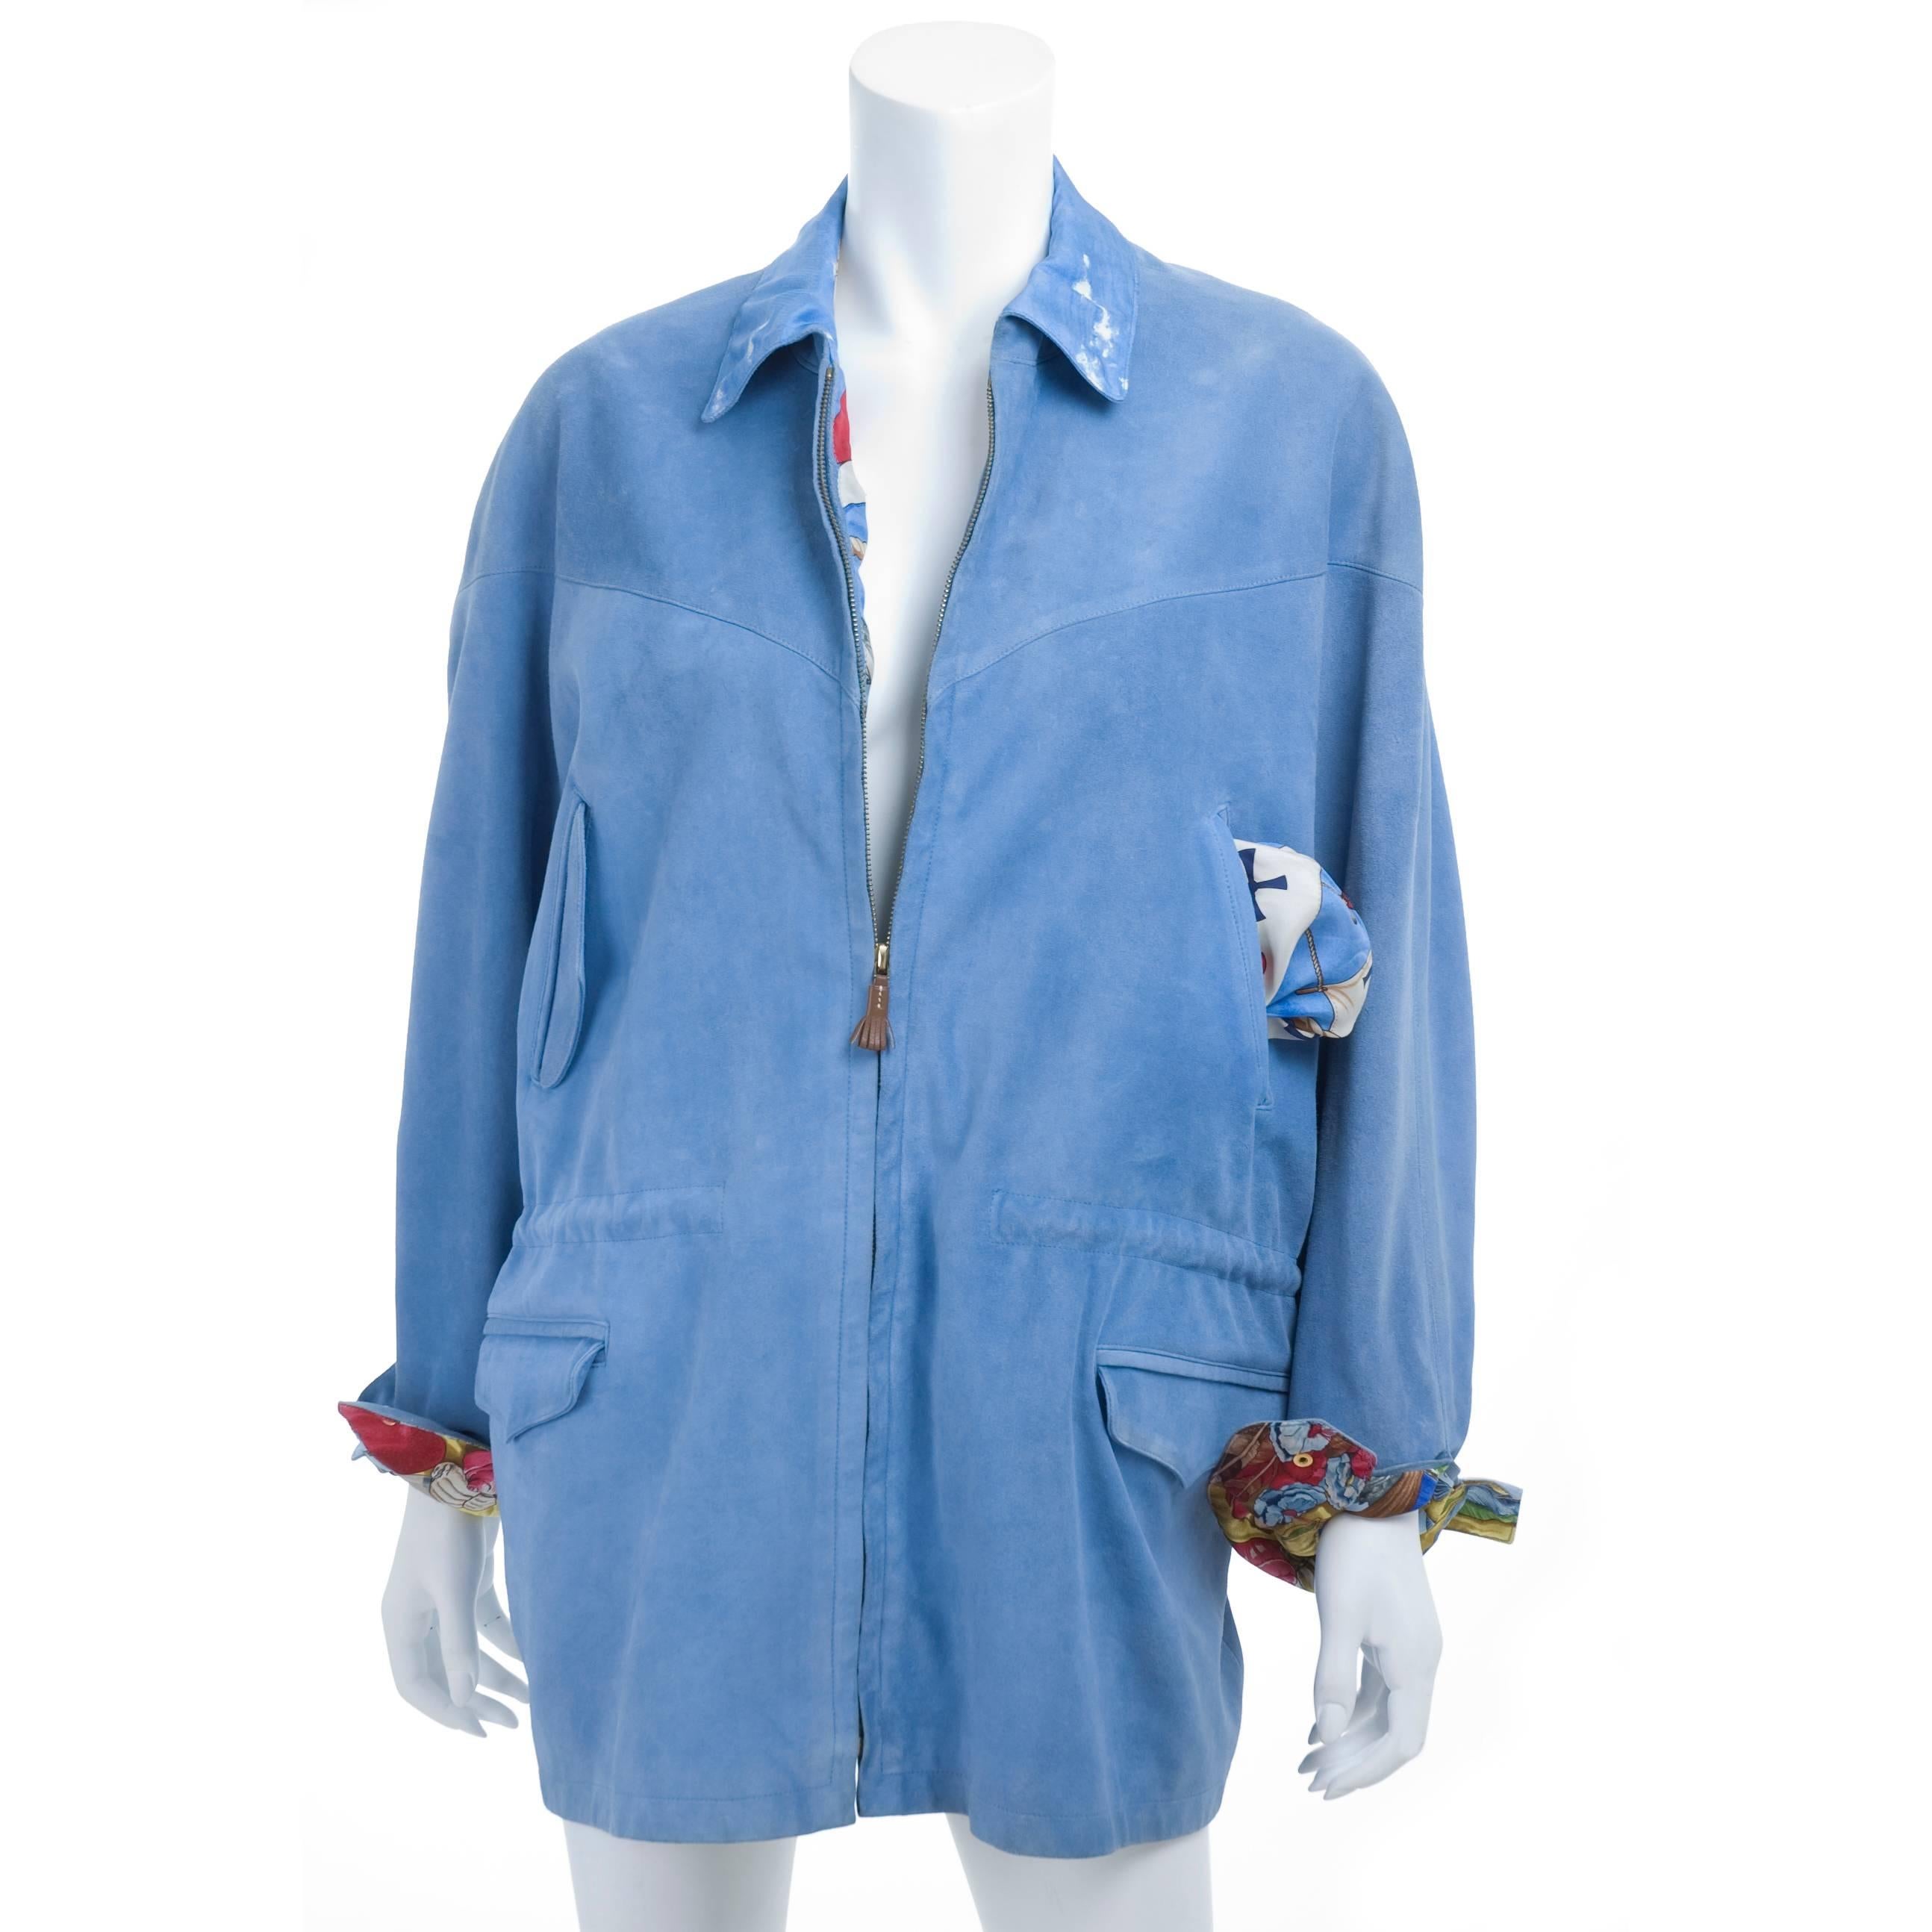 Blue Vintage 90s HERMES Suede & Silk Leather Jacket with Christophe Colomb Print For Sale